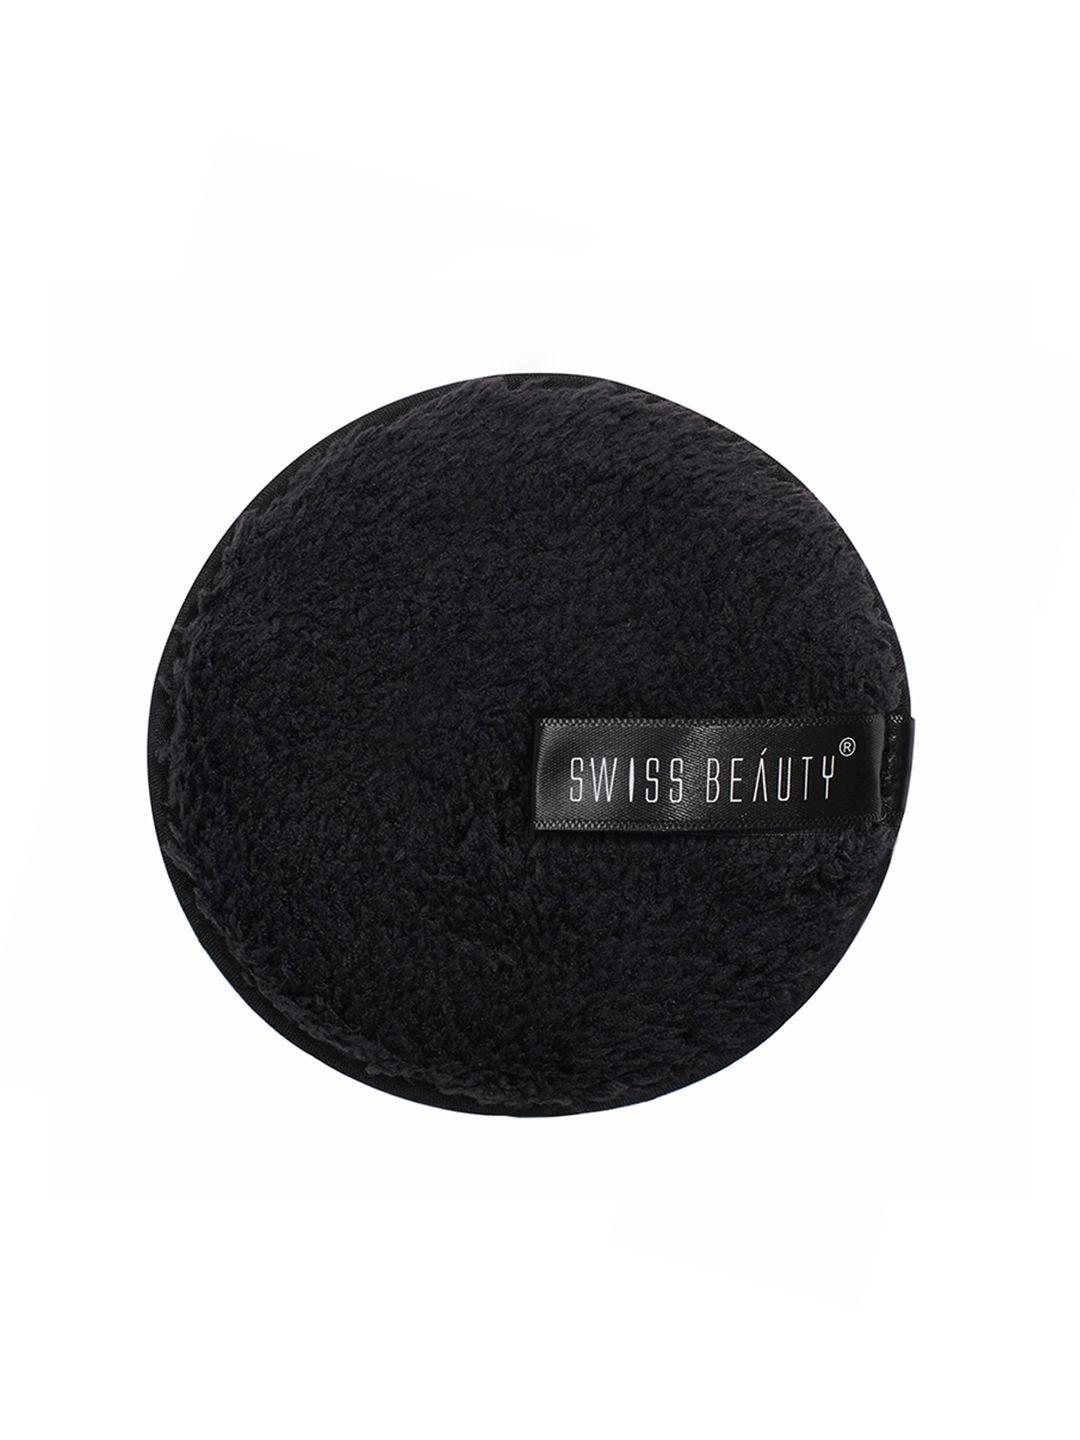 swiss beauty soft & gentle cleansing reusable makeup remover pad - black